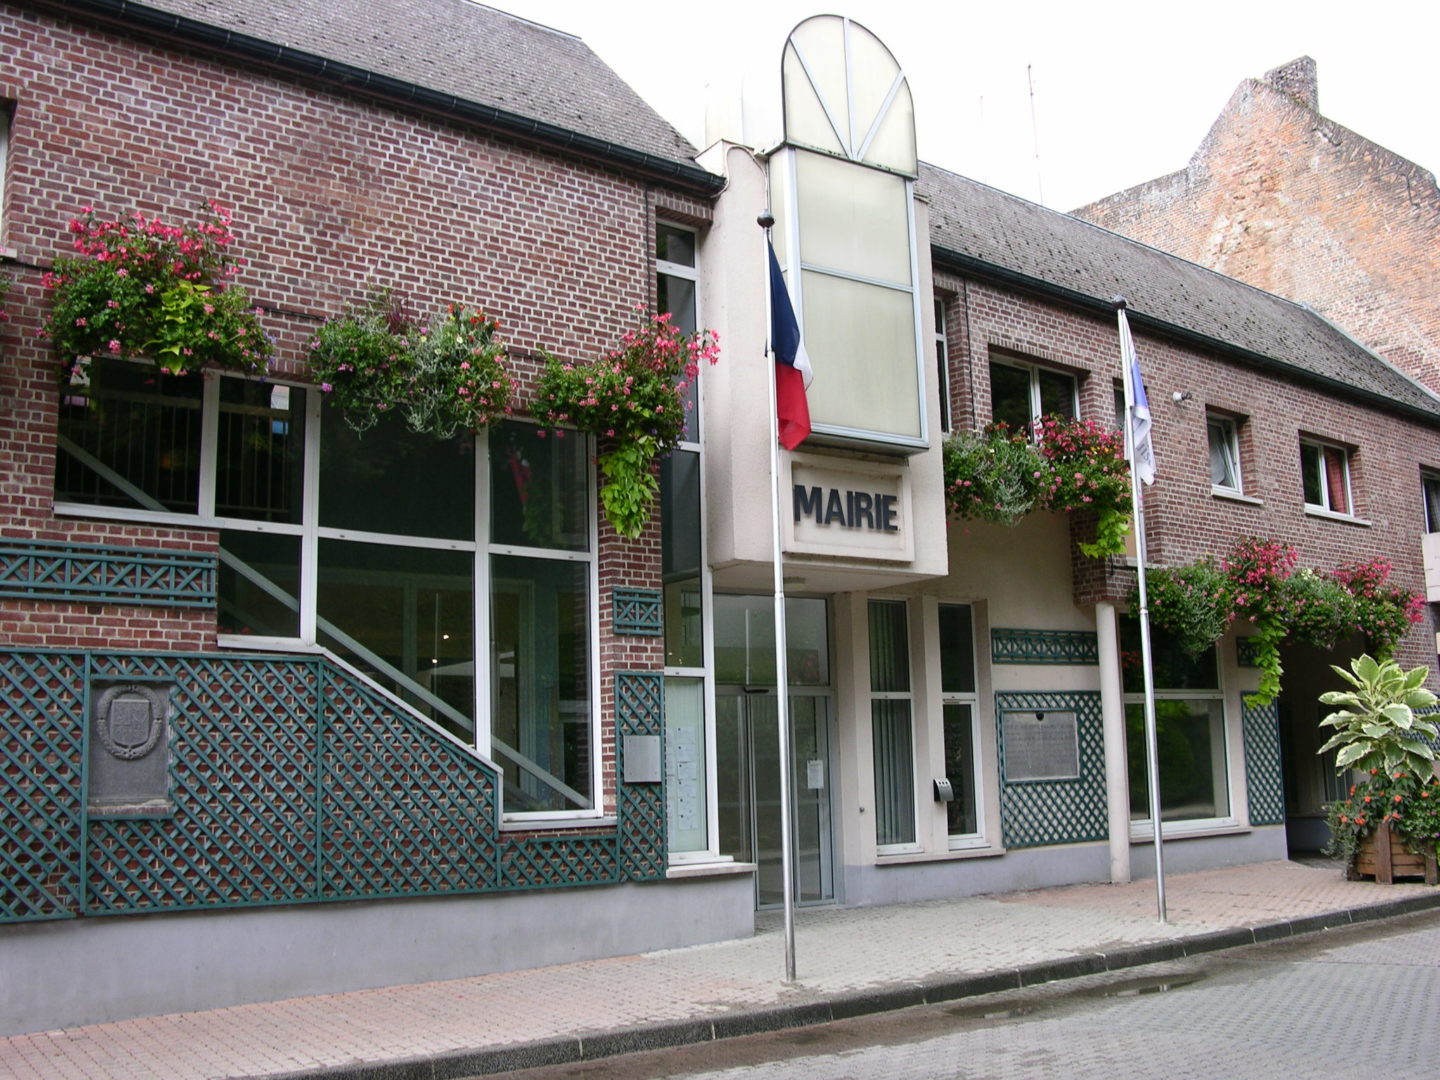 The Marie (Town Hall)